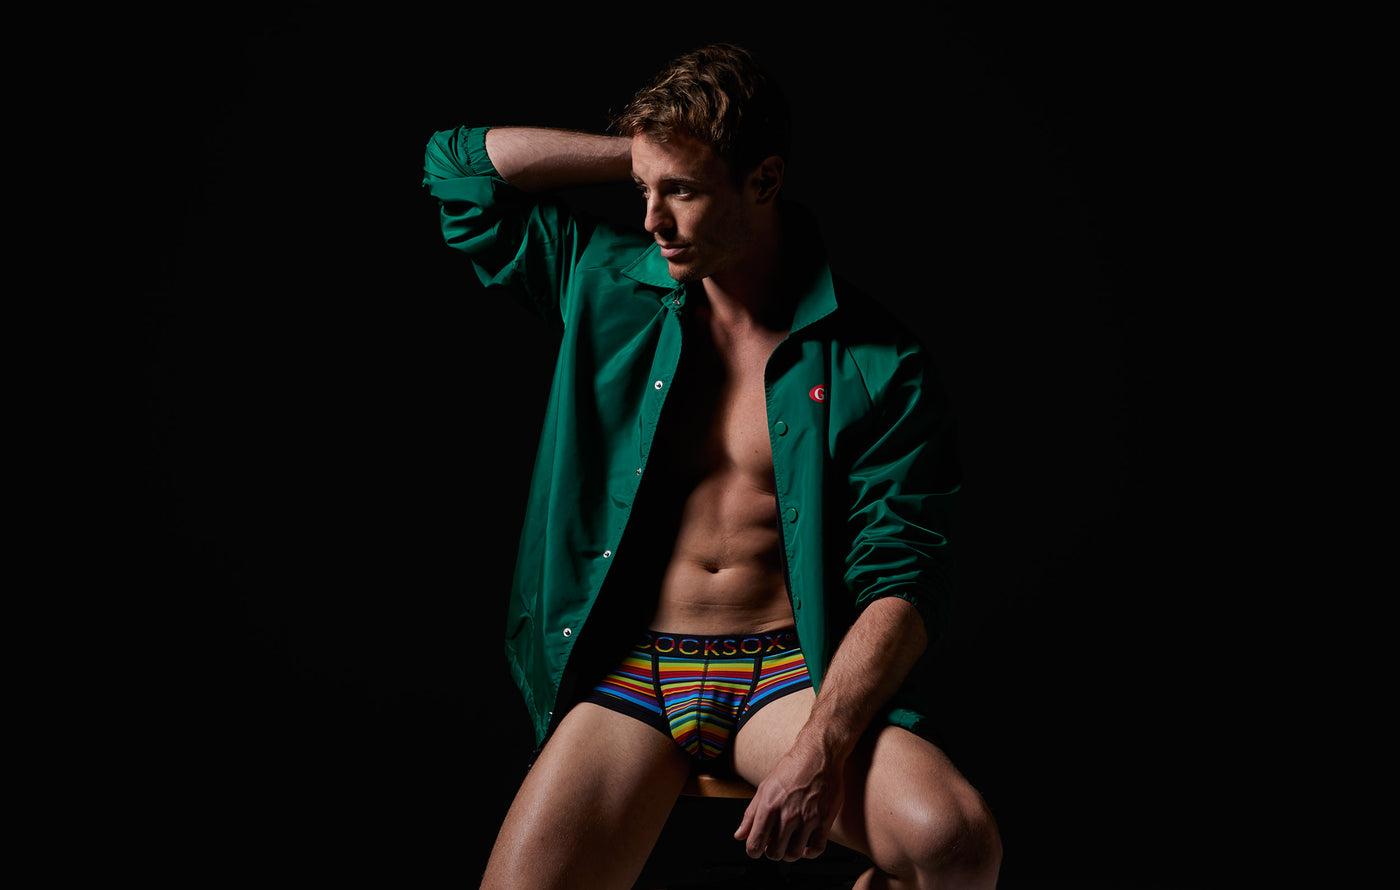 Editorial lifestyle image for the Cocksox Underwear Trunk